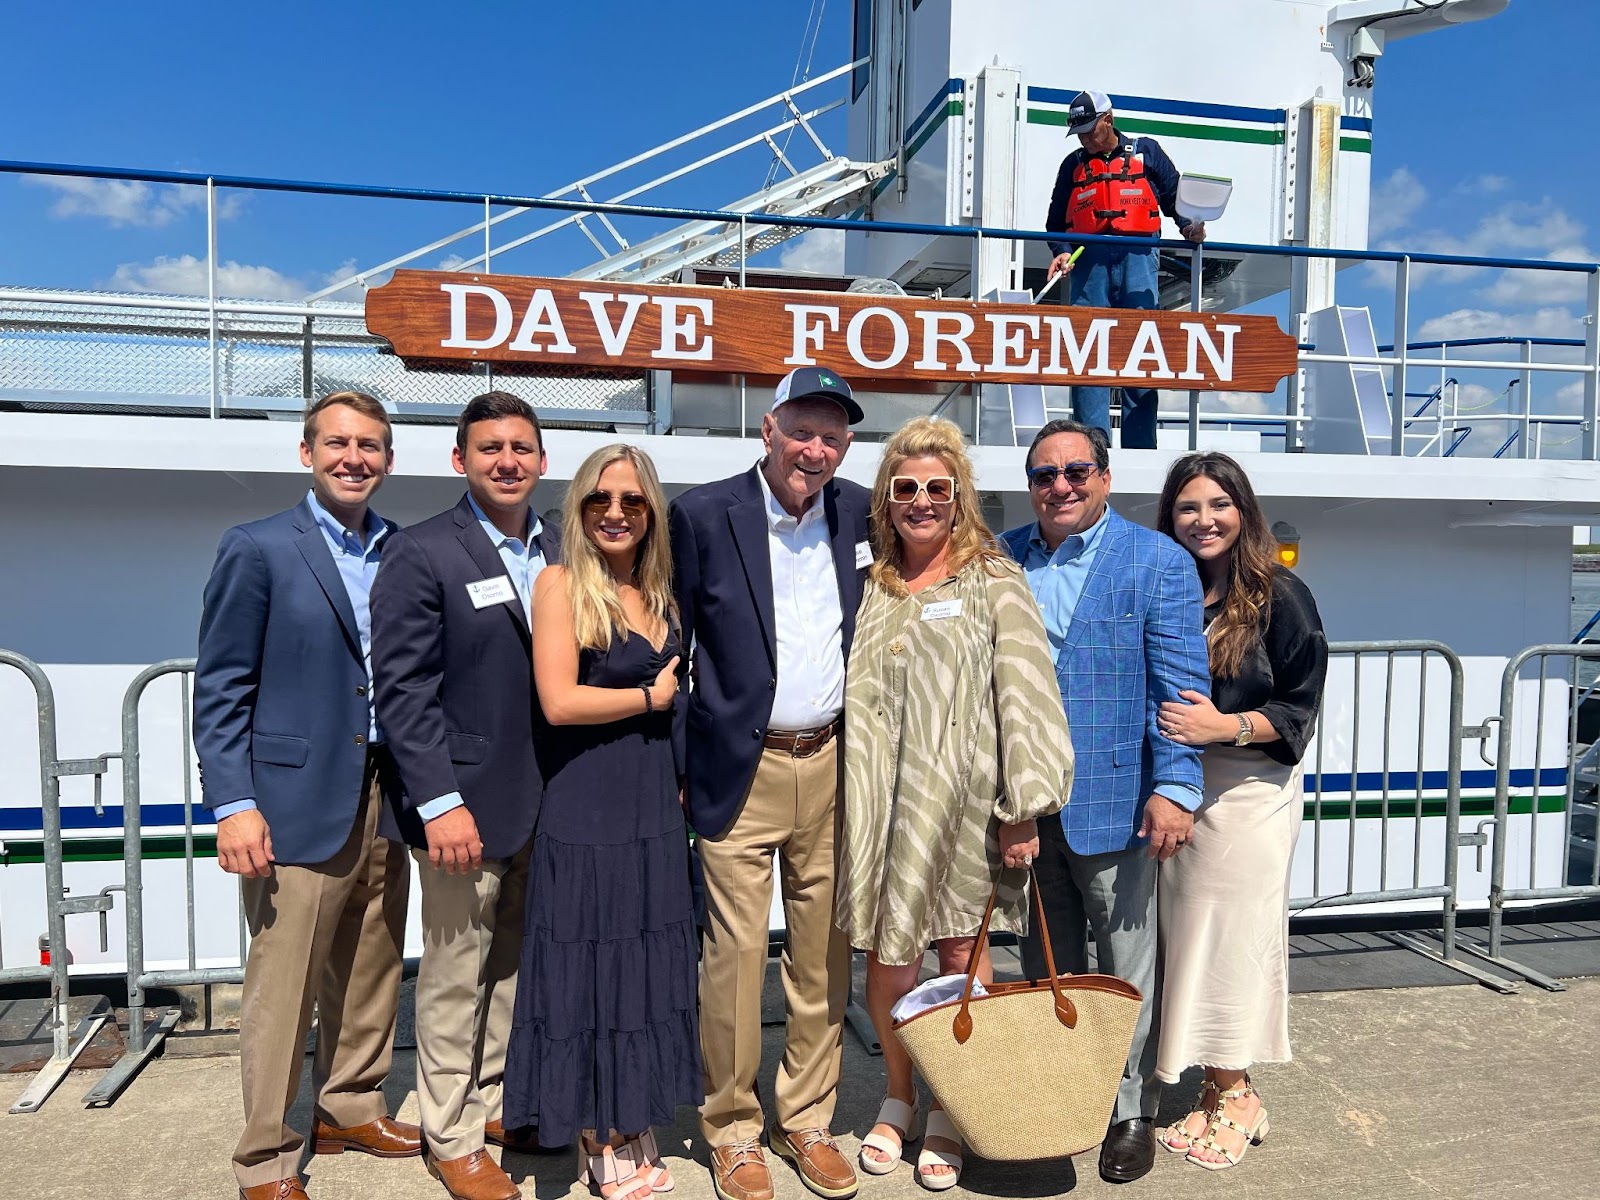 Dave Foreman and the Osorno Family at the christening of the barge of the same namesake.